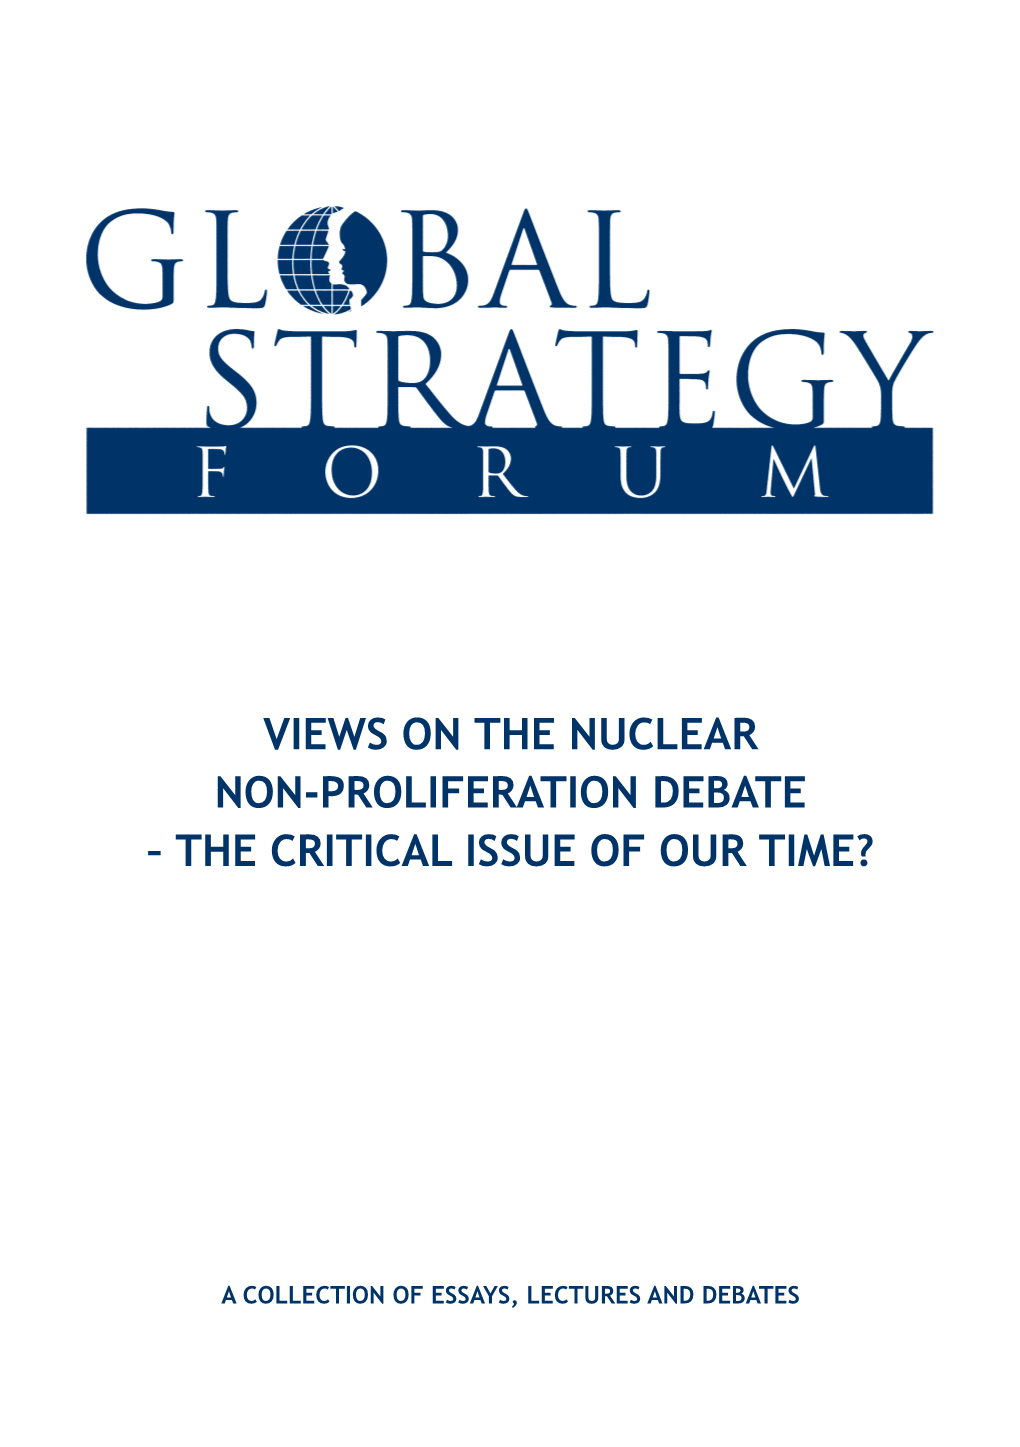 Views on the Nuclear Non-Proliferation Debate – the Critical Issue of Our Time?